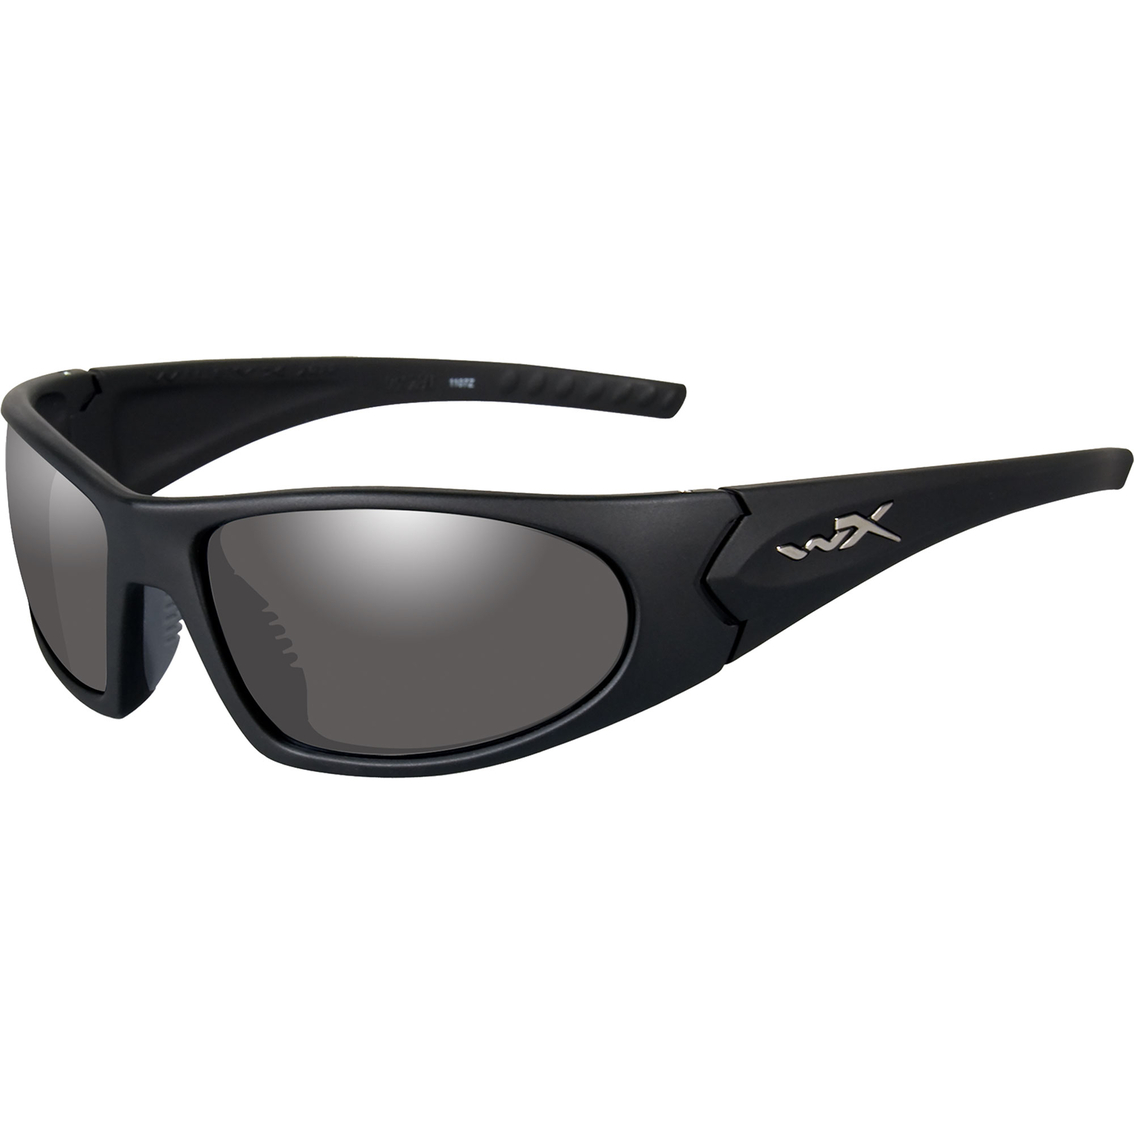 Wiley X Romer 3 Sunglasses Kit with 2 Lens